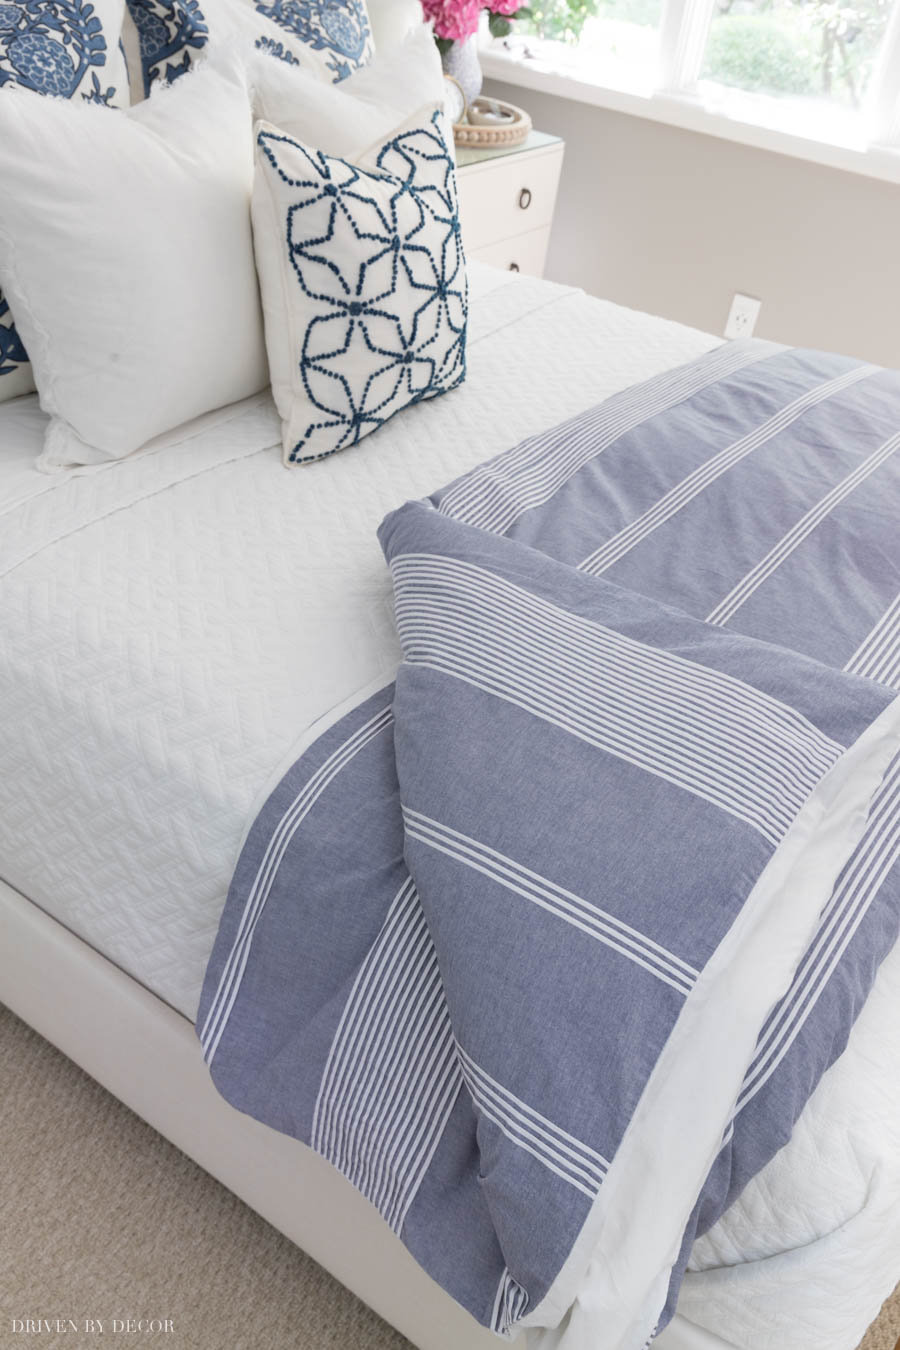 Bed Making 101: How to Layer a Bed for a Designer Look! - Driven by Decor